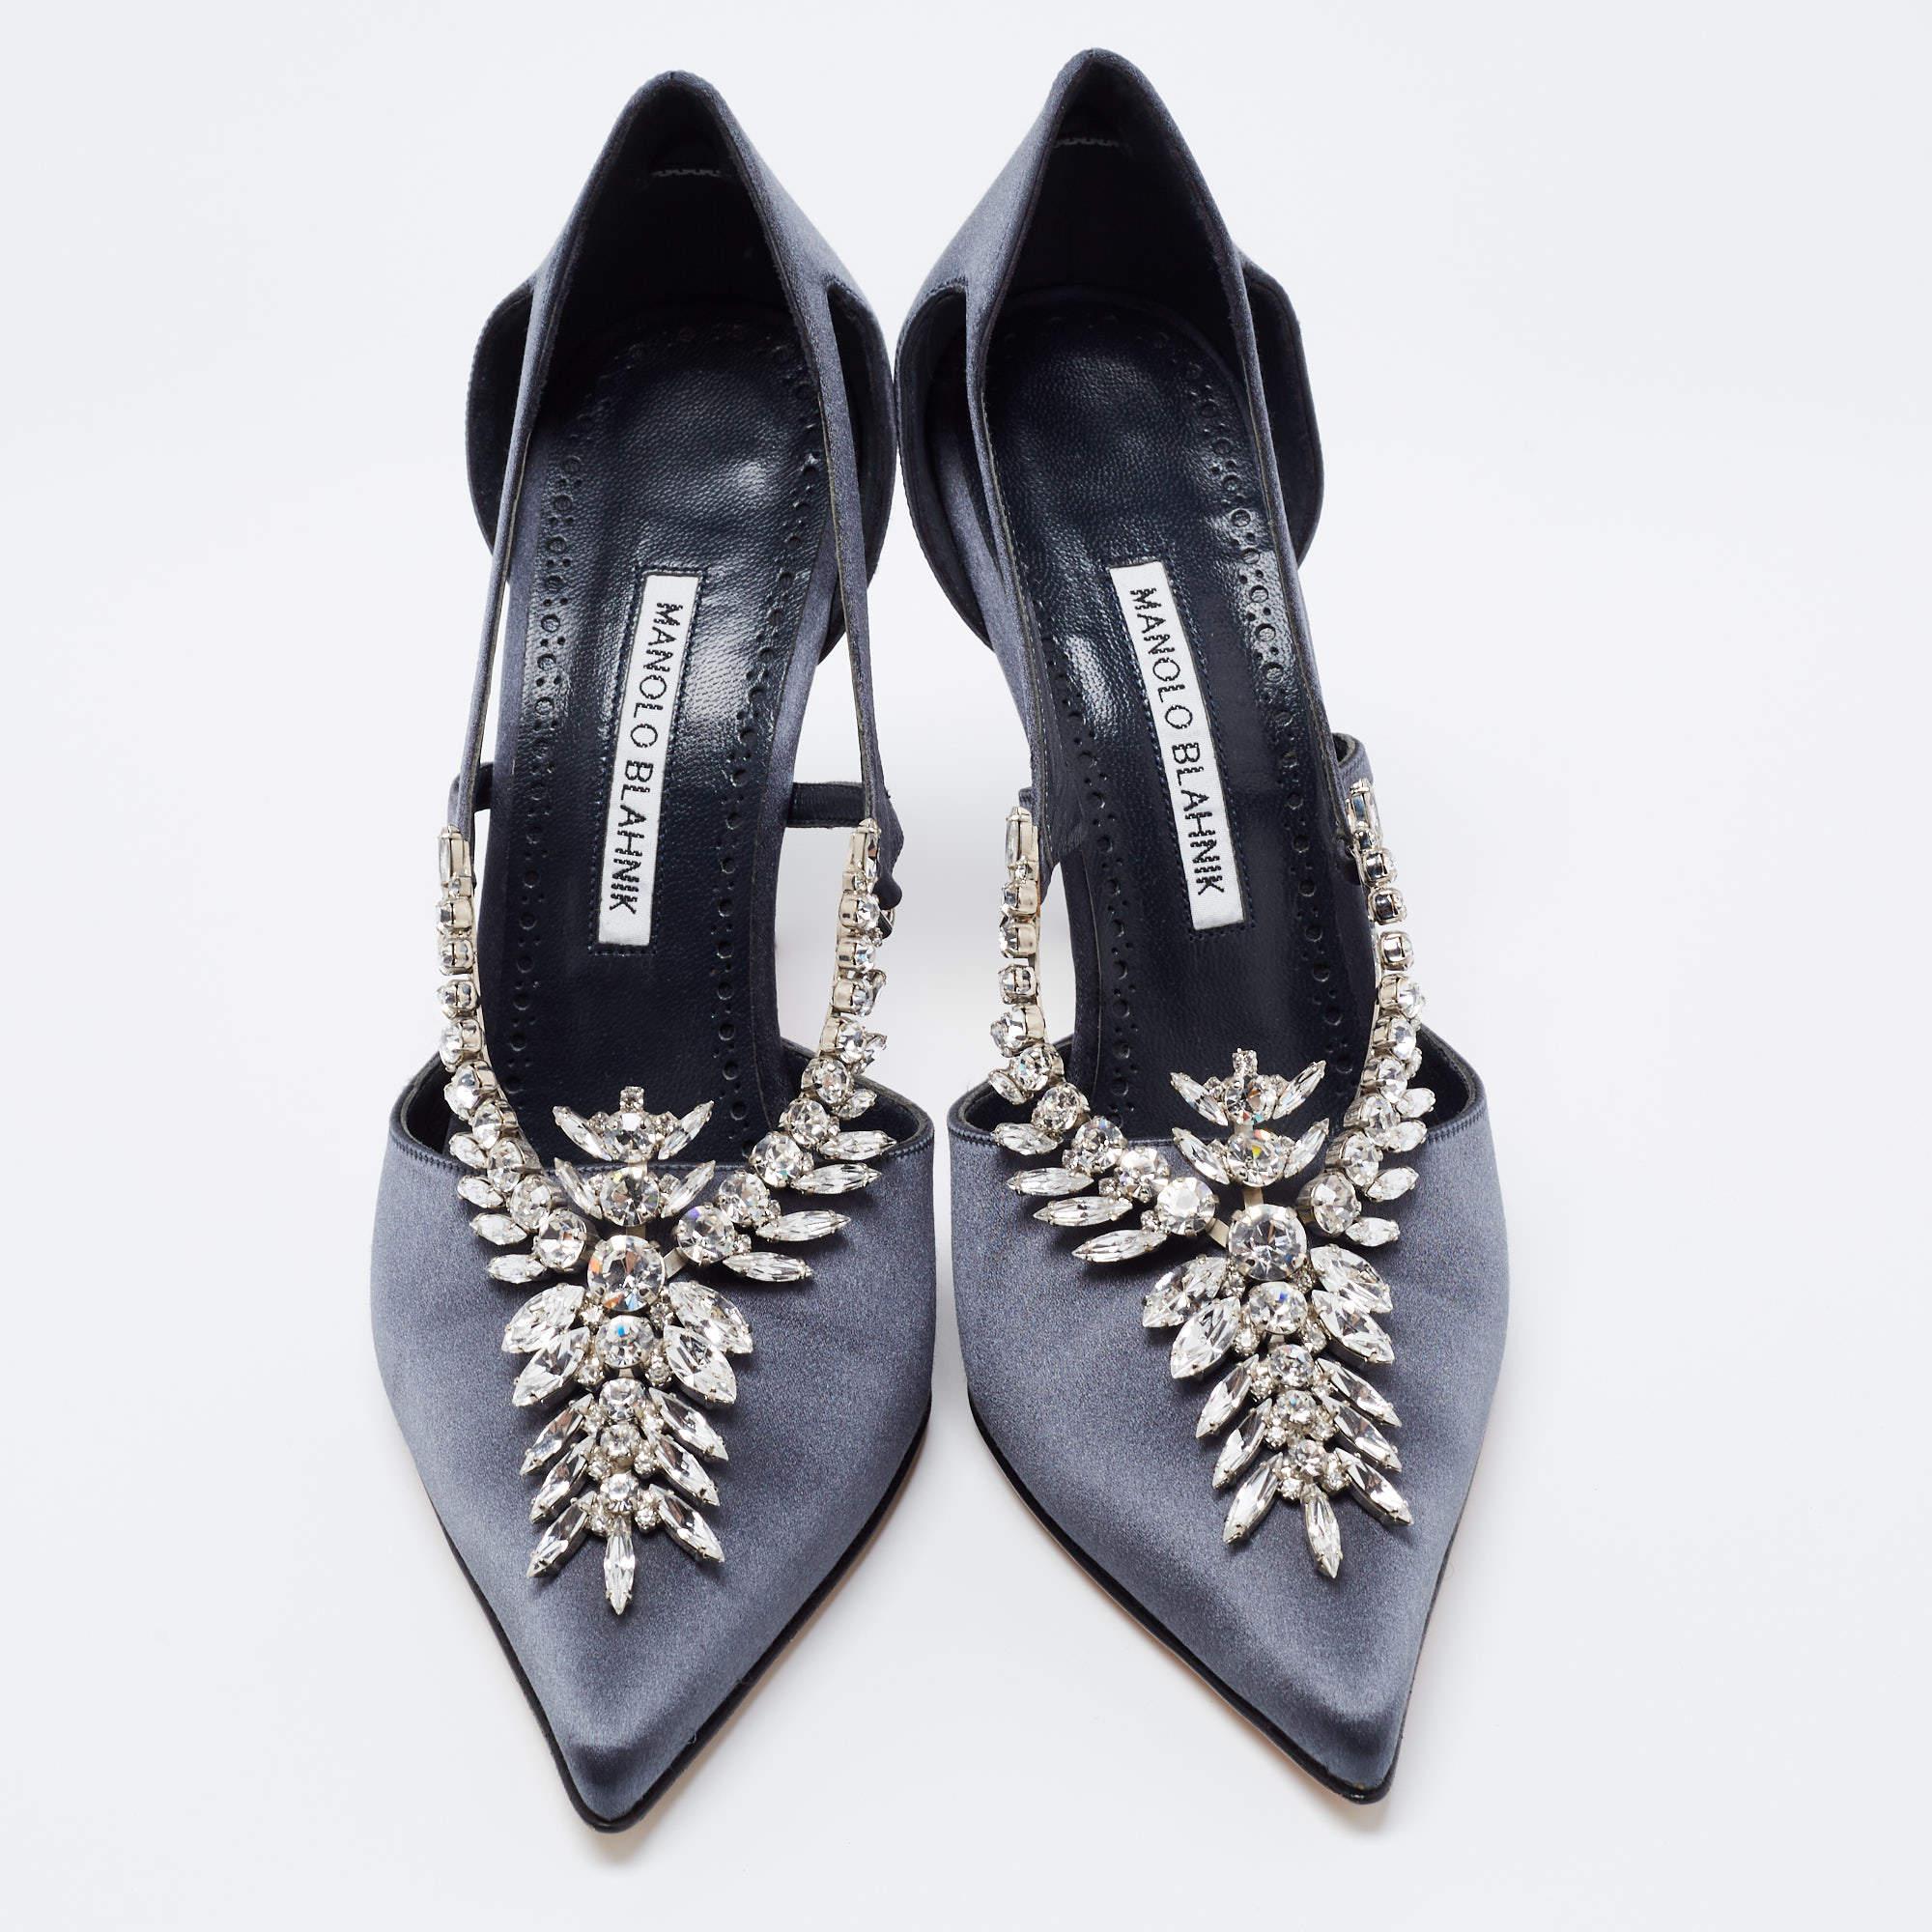 To lend your feet elegance, Manolo Blahnik brings you these gorgeous pumps. From their sleek shape and luscious dark grey finish to their overall appeal, they are utterly mesmerizing. The pumps come crafted from smooth satin and are designed with